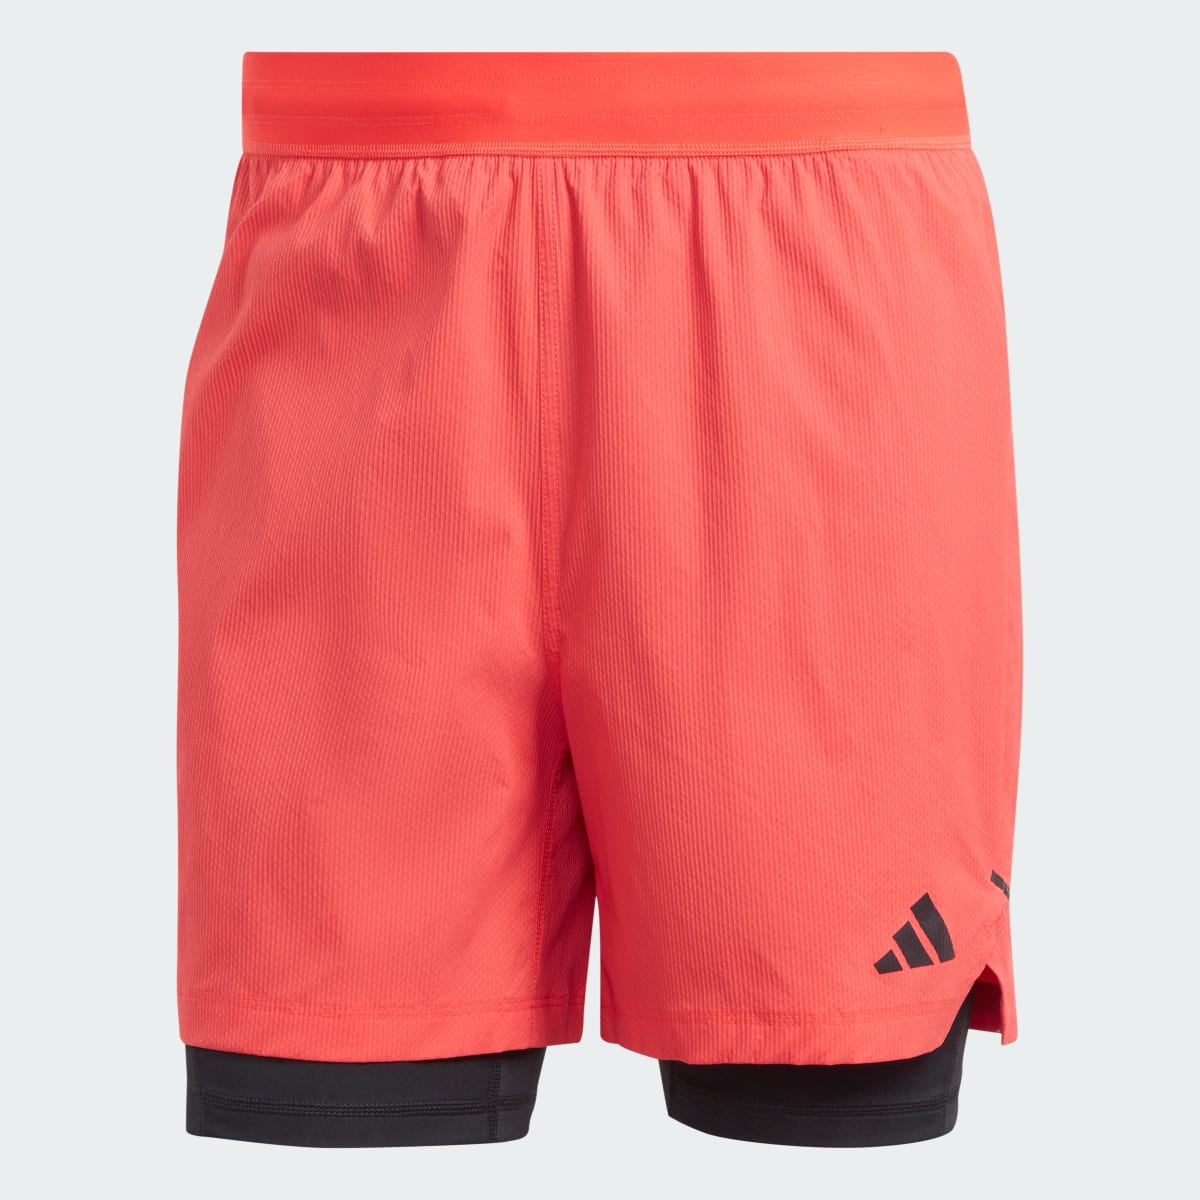 Adidas Short Power Workout Two-in-One. 4